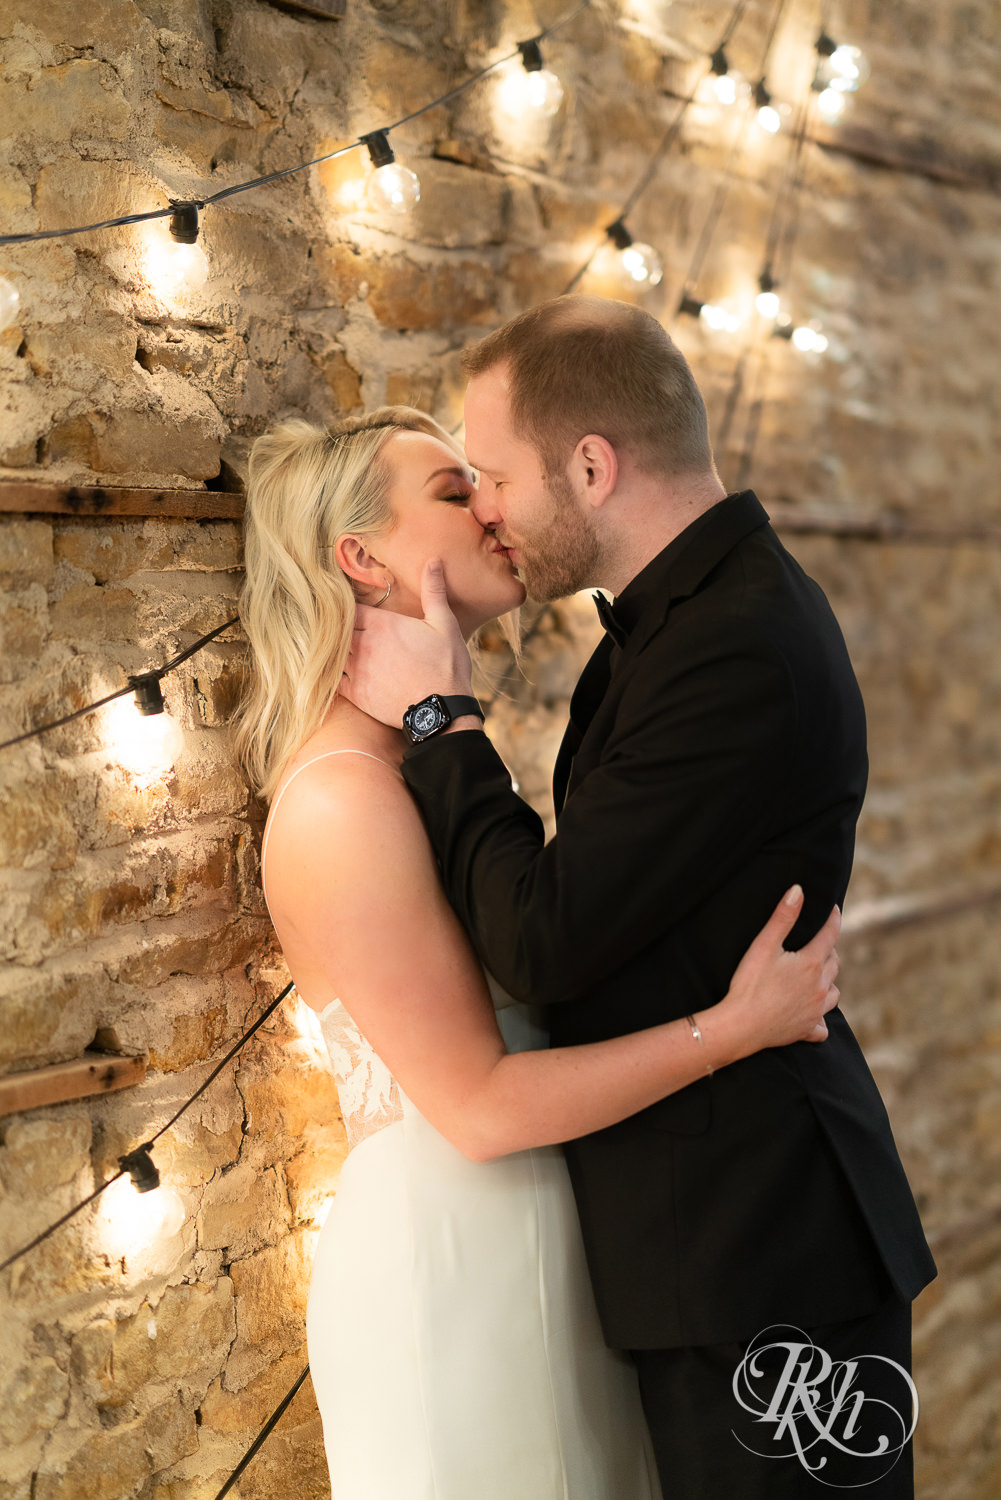 Bride and groom kissing in front of brick wall in 3 Ten Event Venue in Faribault, Minnesota.